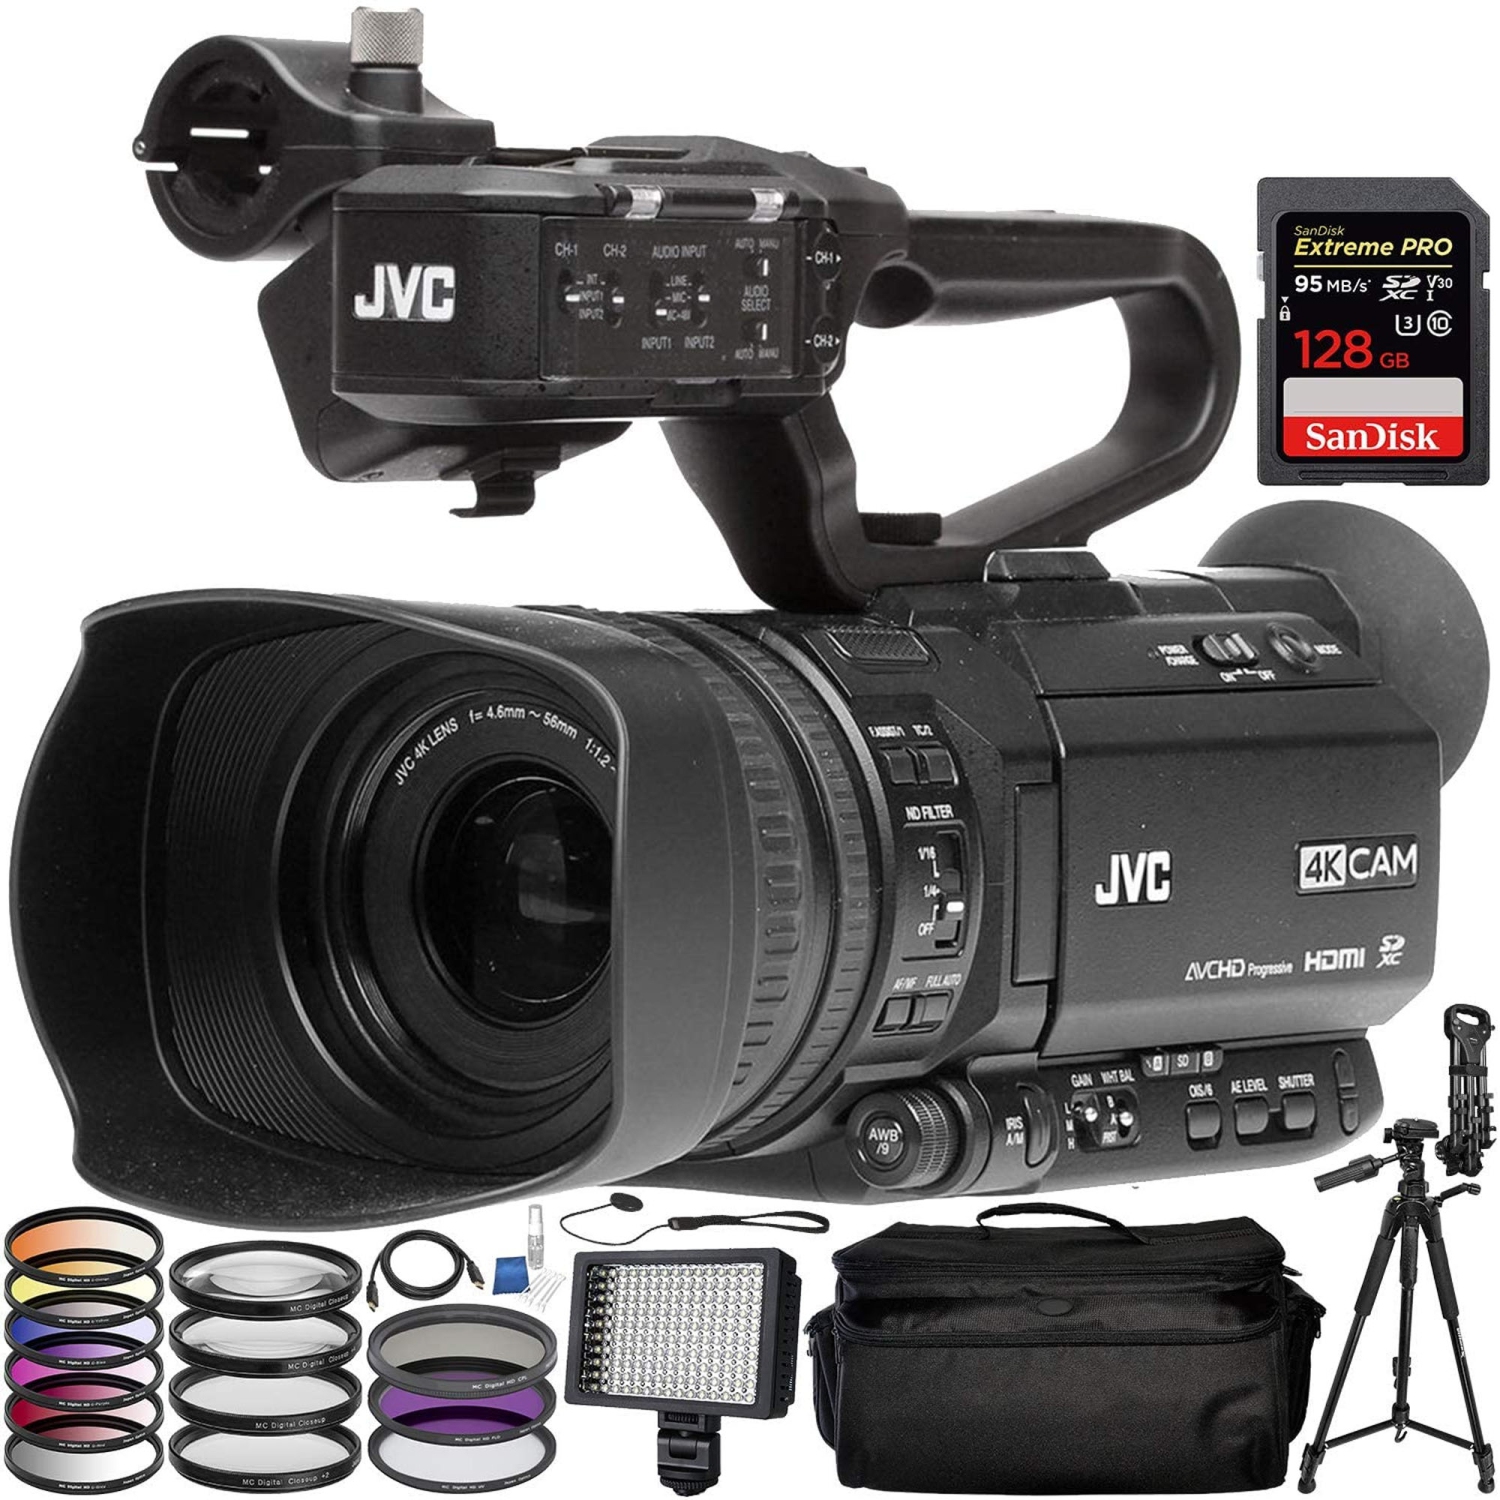 JVC GY-HM180 Ultra HD 4K Camcorder with HD-SDI with Additional Accessories - US Version w/ Seller Warranty